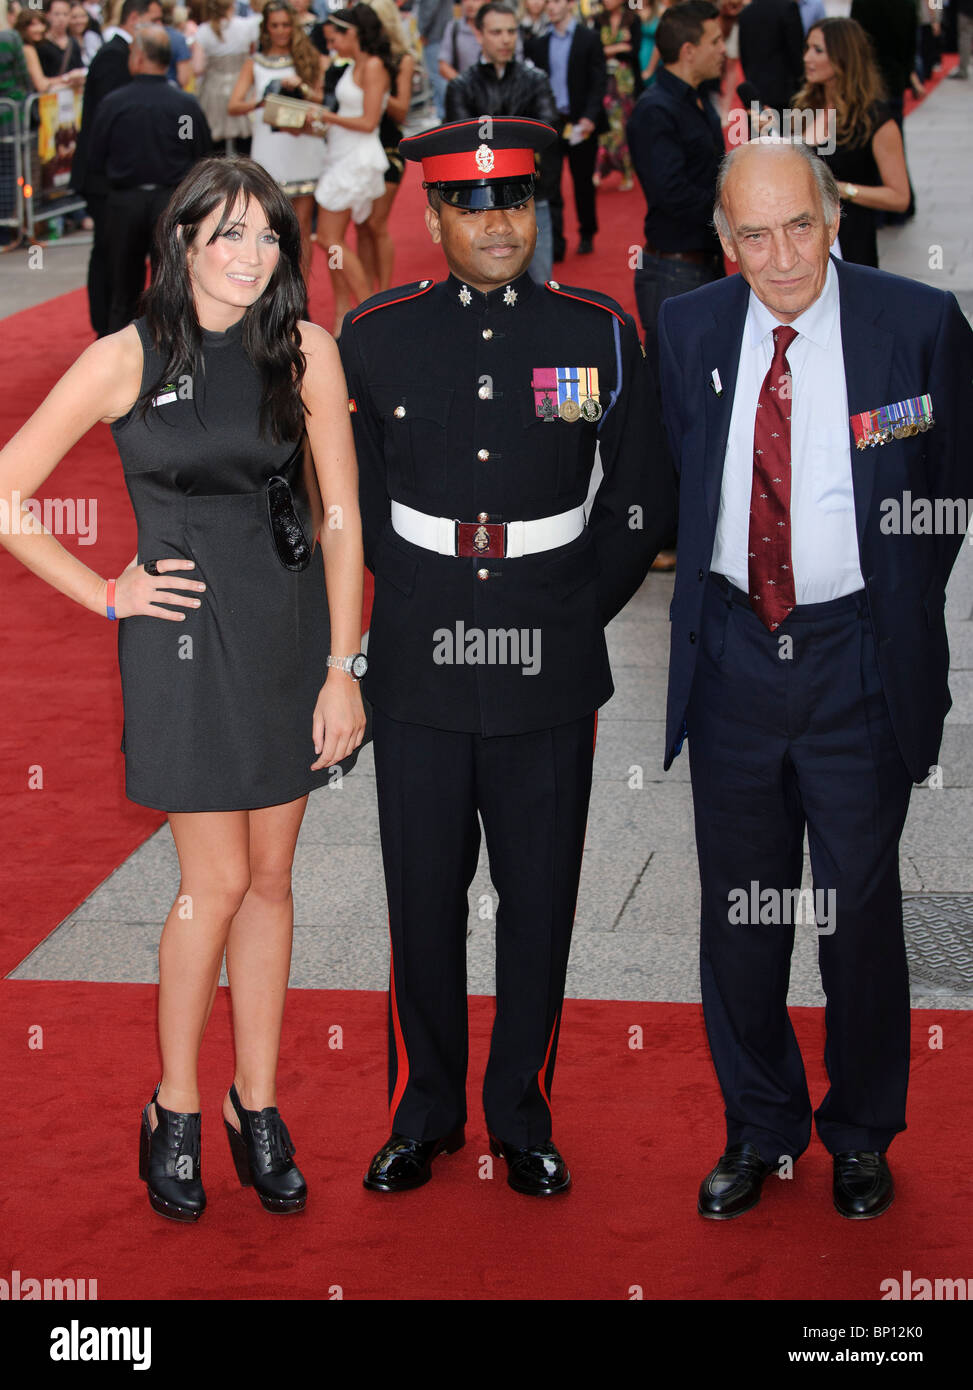 Lance Corporal Johnson Beharry and General Sir Mike Jackson at the UK Premiere of 'The Expendables', Leicester Square, London. Stock Photo